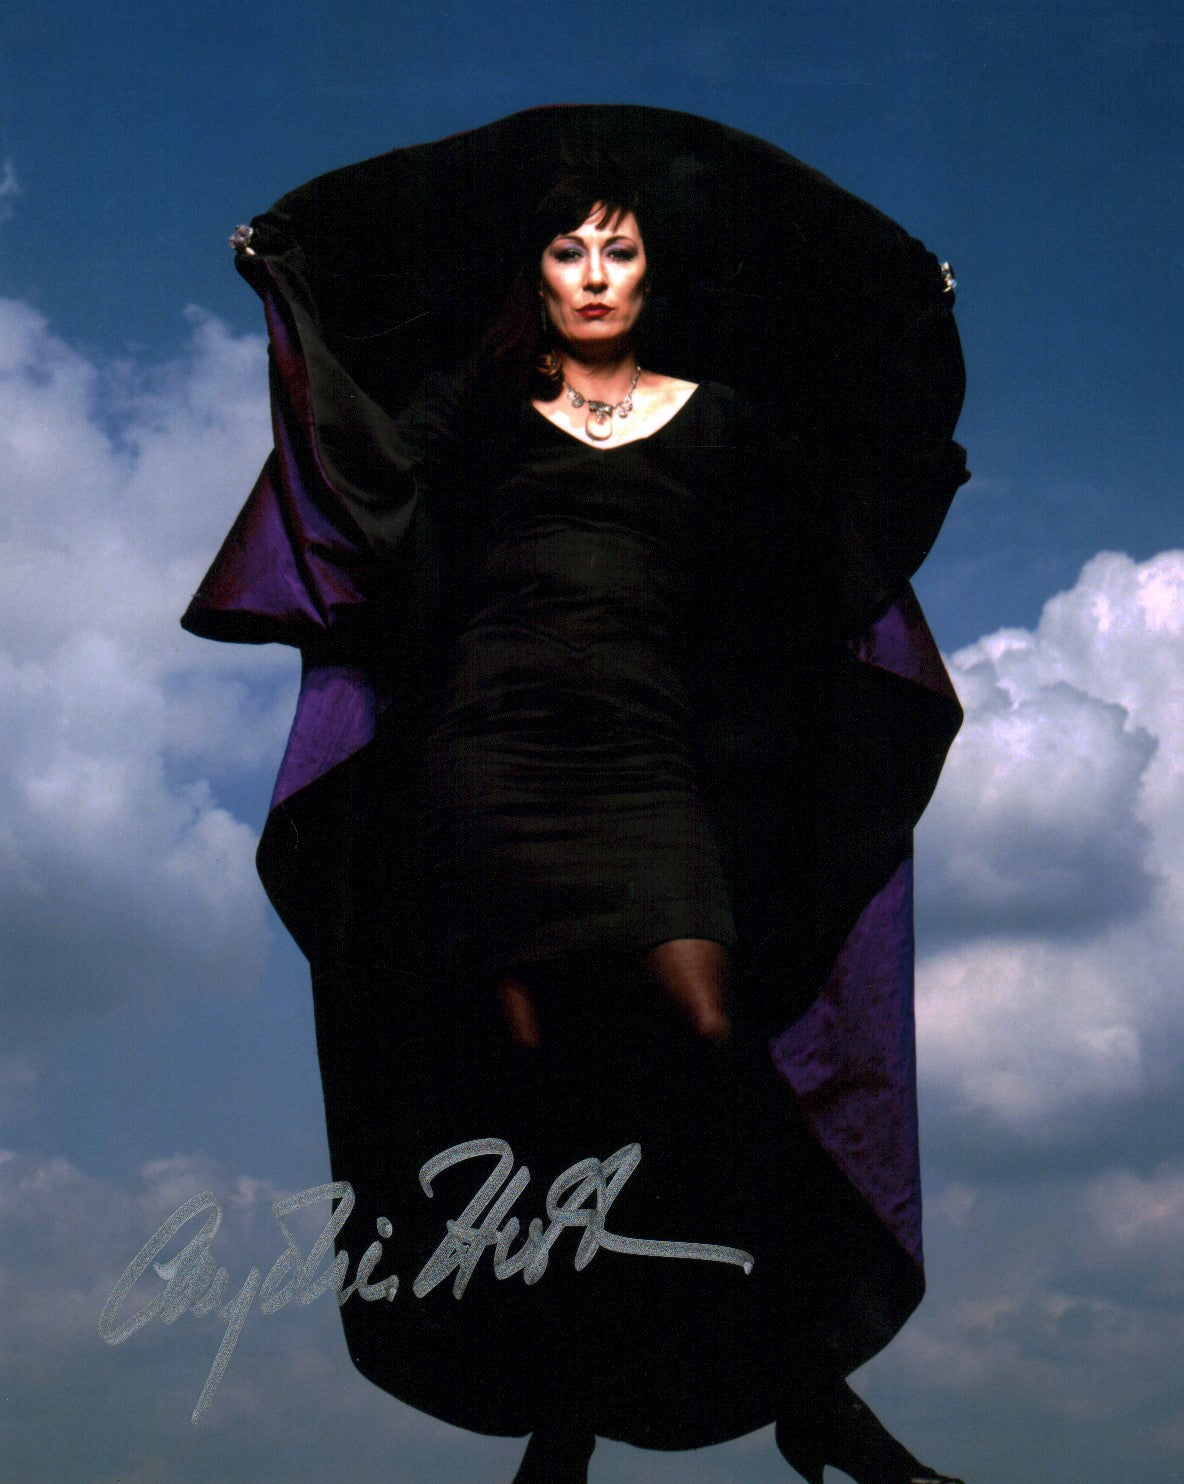 Anjelica Huston The Witches 8x10 Signed Photo JSA COA Certified Autograph GalaxyCon